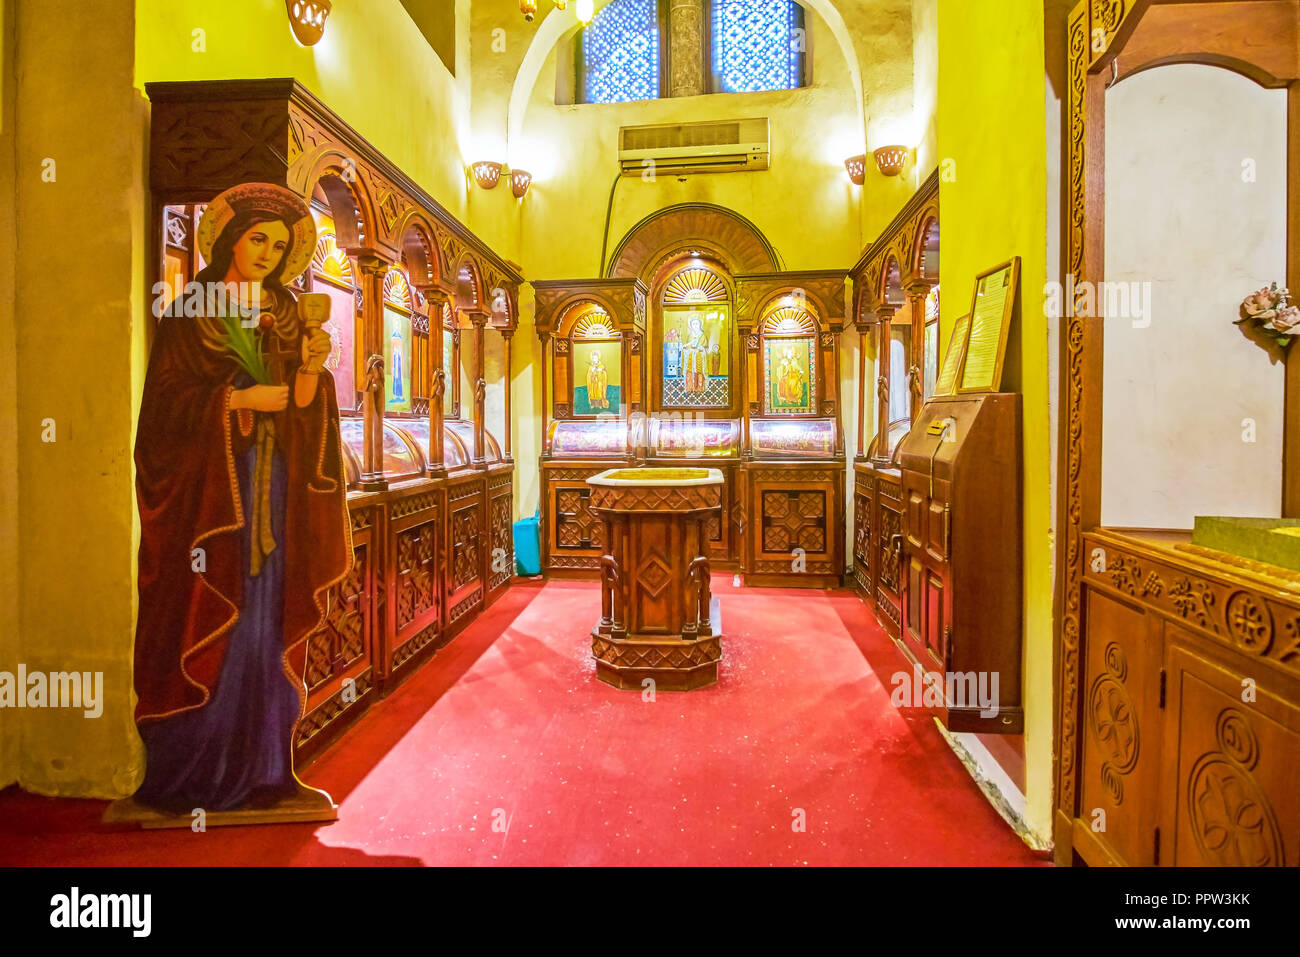 CAIRO, EGYPT - DECEMBER 23, 2017: The small chapel in Abu Serga Church decorated with medieval icons in wooden kiots and the Holy Water stoup in the m Stock Photo